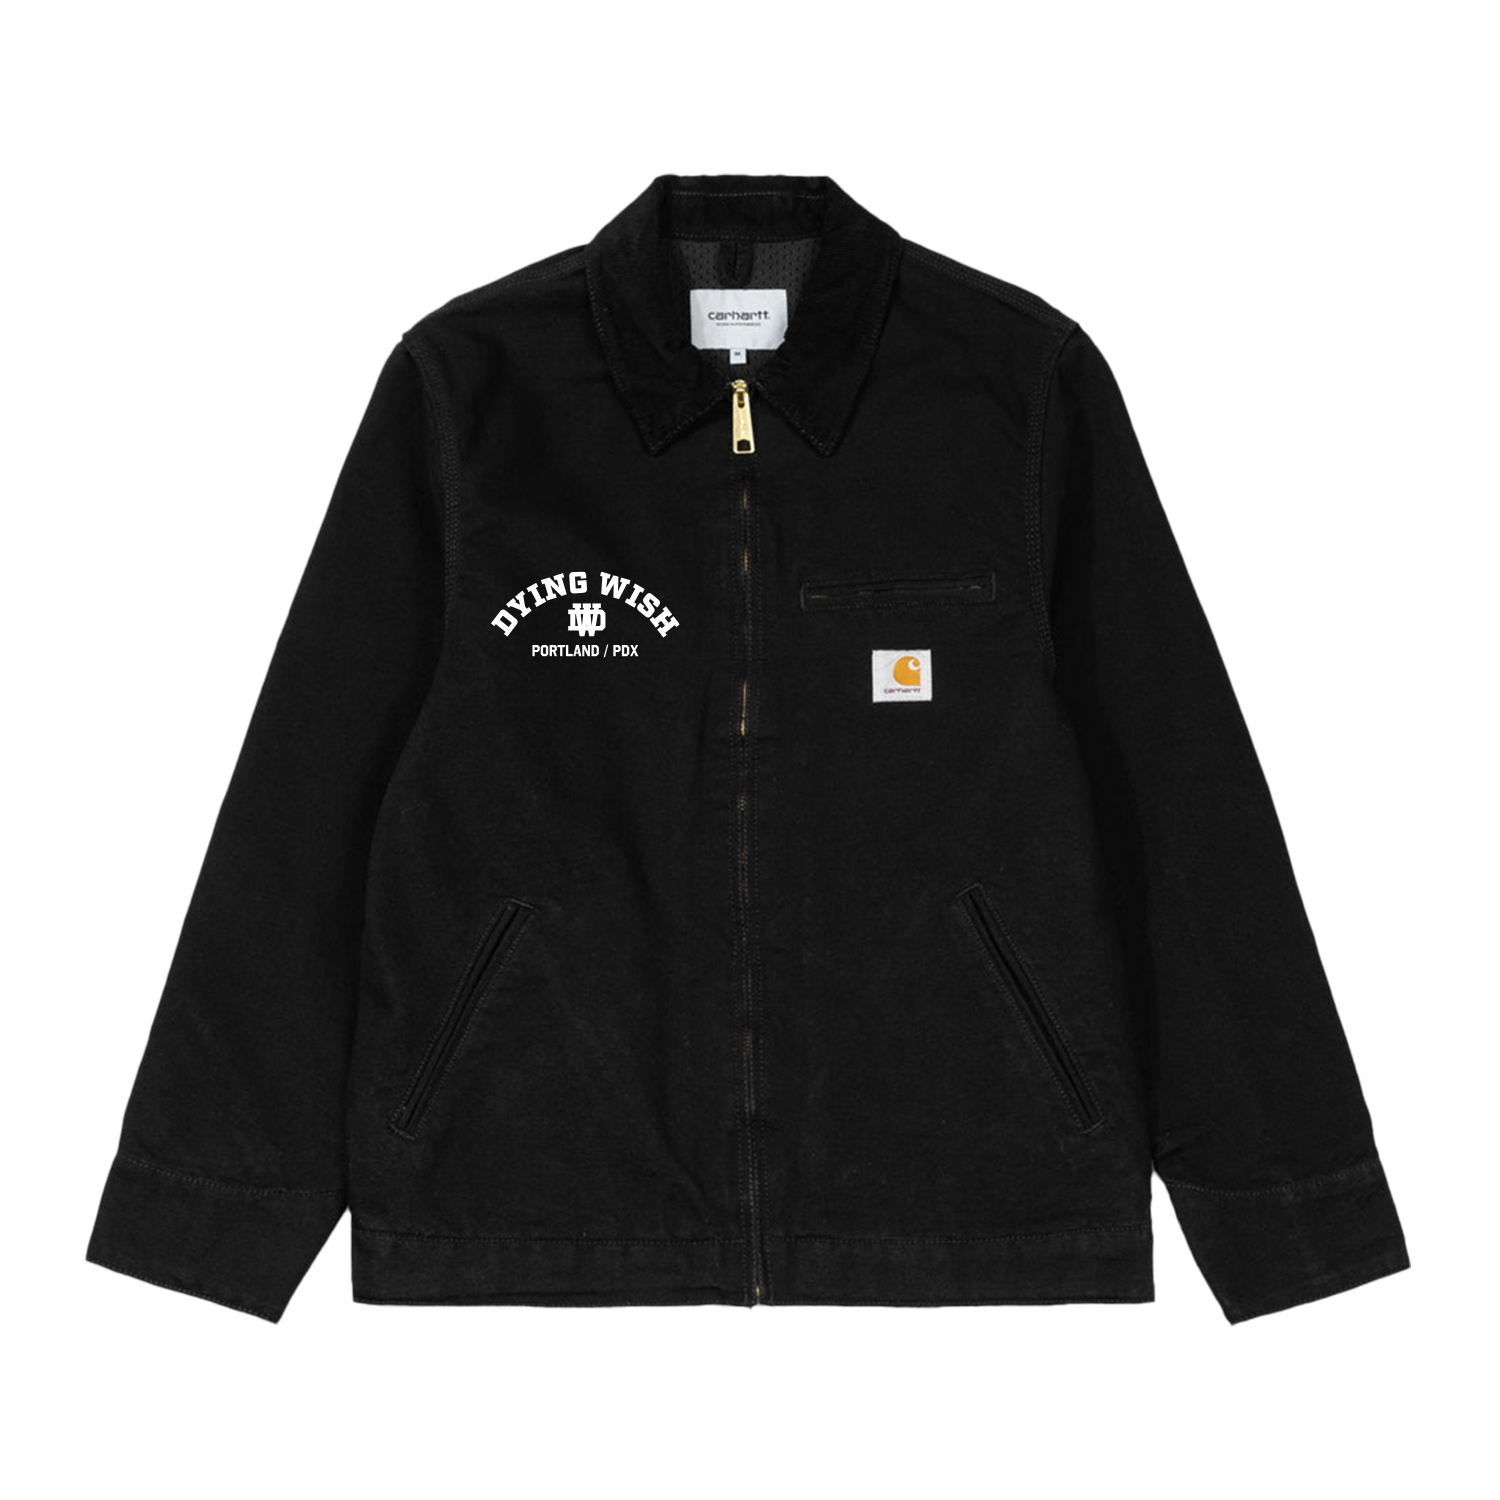 Dying Wish Carhartt Jacket - Embroidered Limited Edition